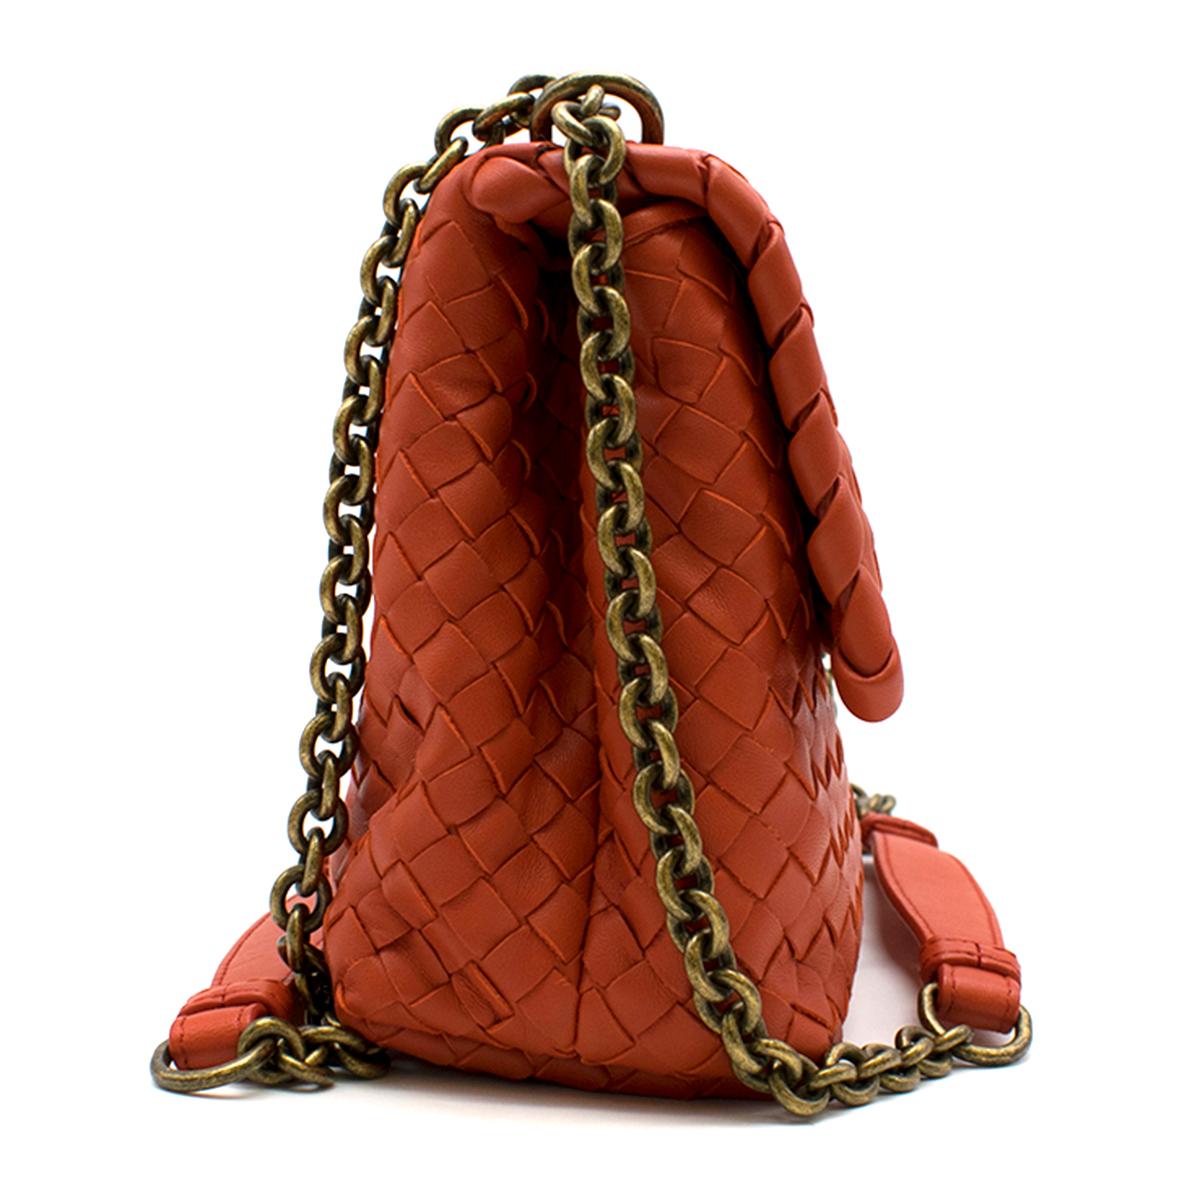 Bottega Veneta Red Small Intrecciato Olimpia Bag

-Red, lambskin
-Cross-woven pattern
-Shoulder bag 
-Brass hardware
-Flap and magnetic closure 
-Two interior main compartments
-Small zip compartment 
-Adjustable hand strap/shoulder strap
-Nude